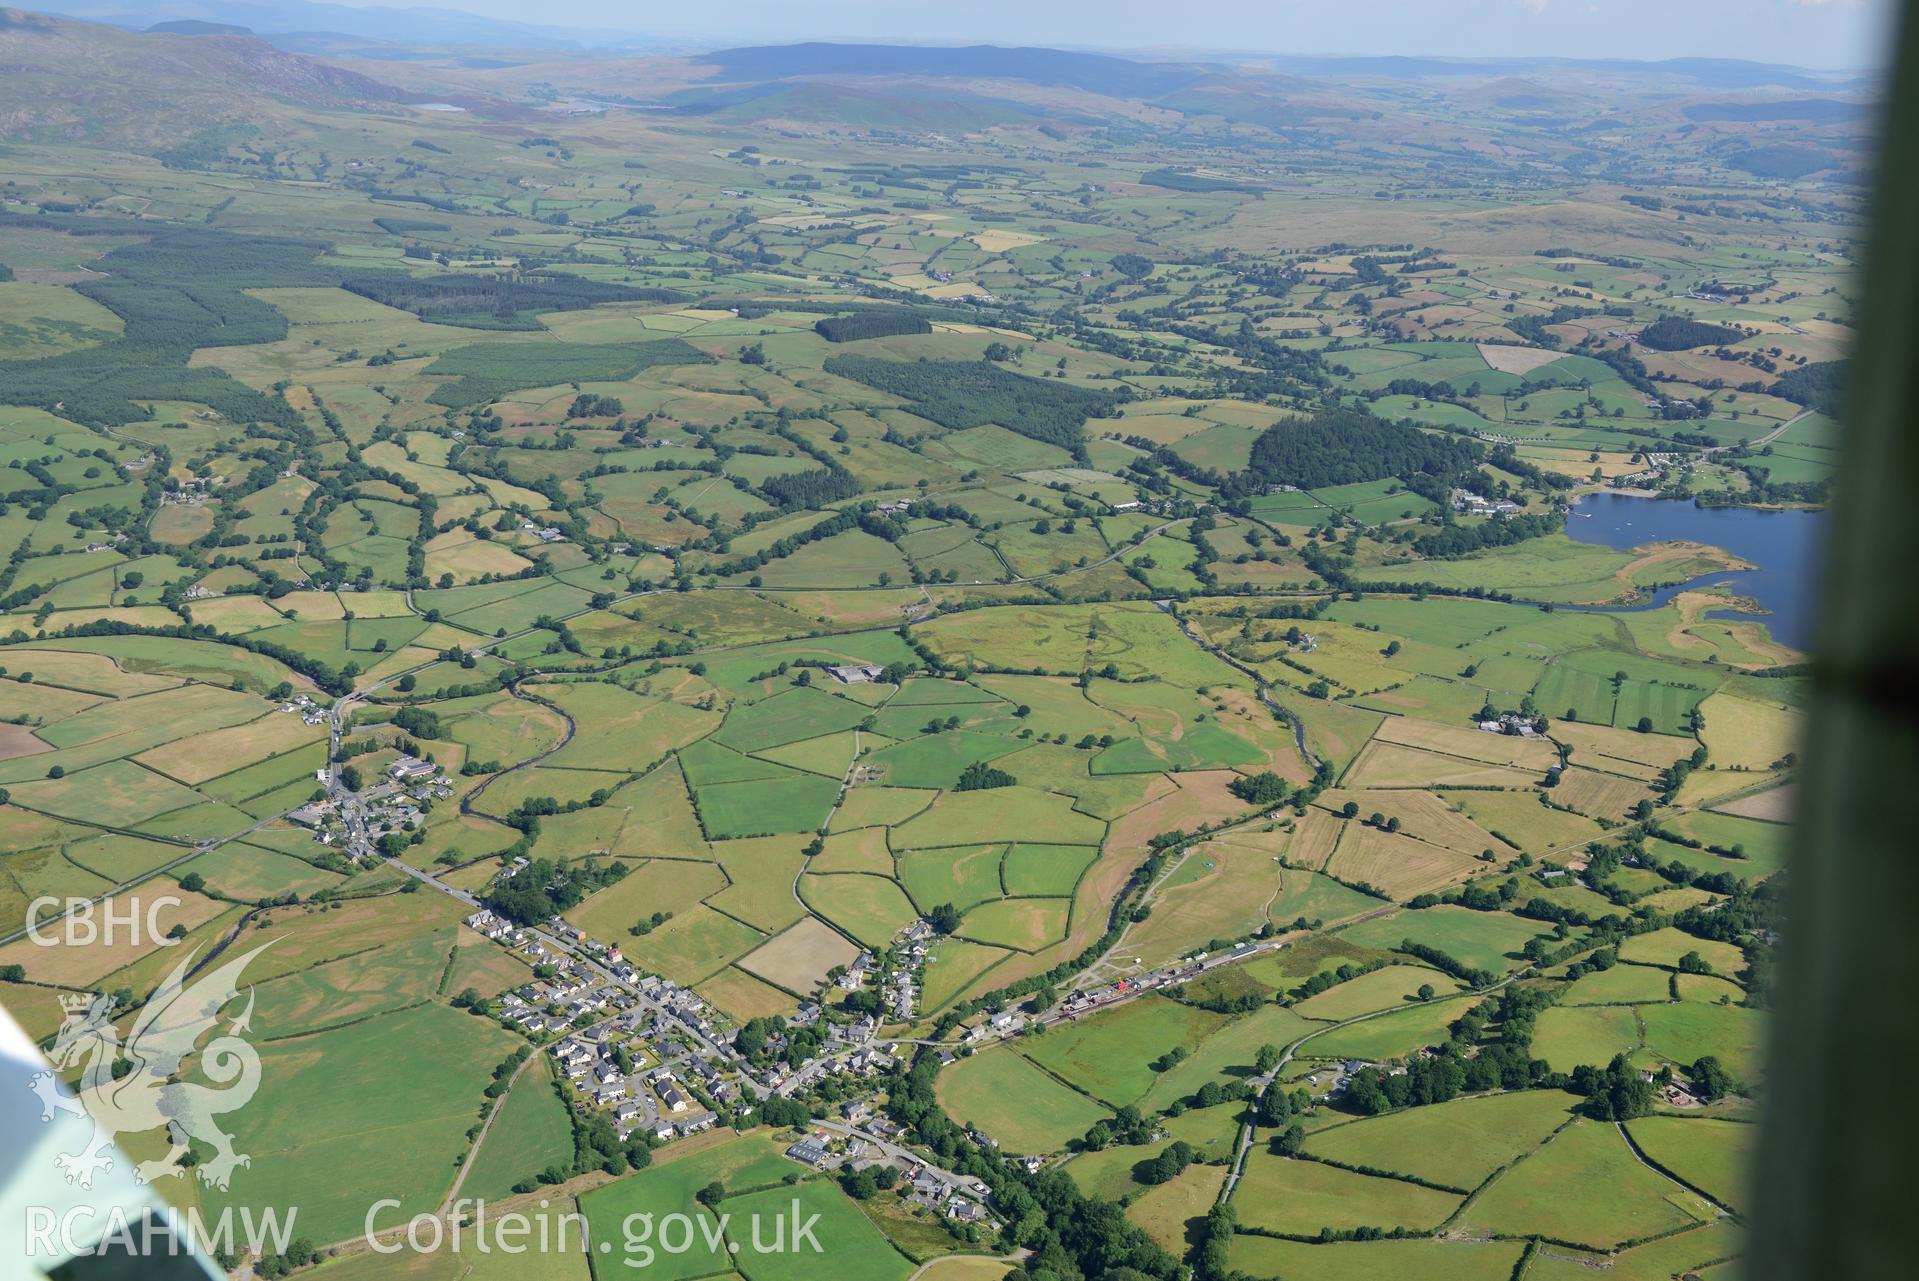 Royal Commission aerial photography of Bala Lake Railway, with non-archaeological parchmarks of a camping ground nearby, taken on 19th July 2018 during the 2018 drought.